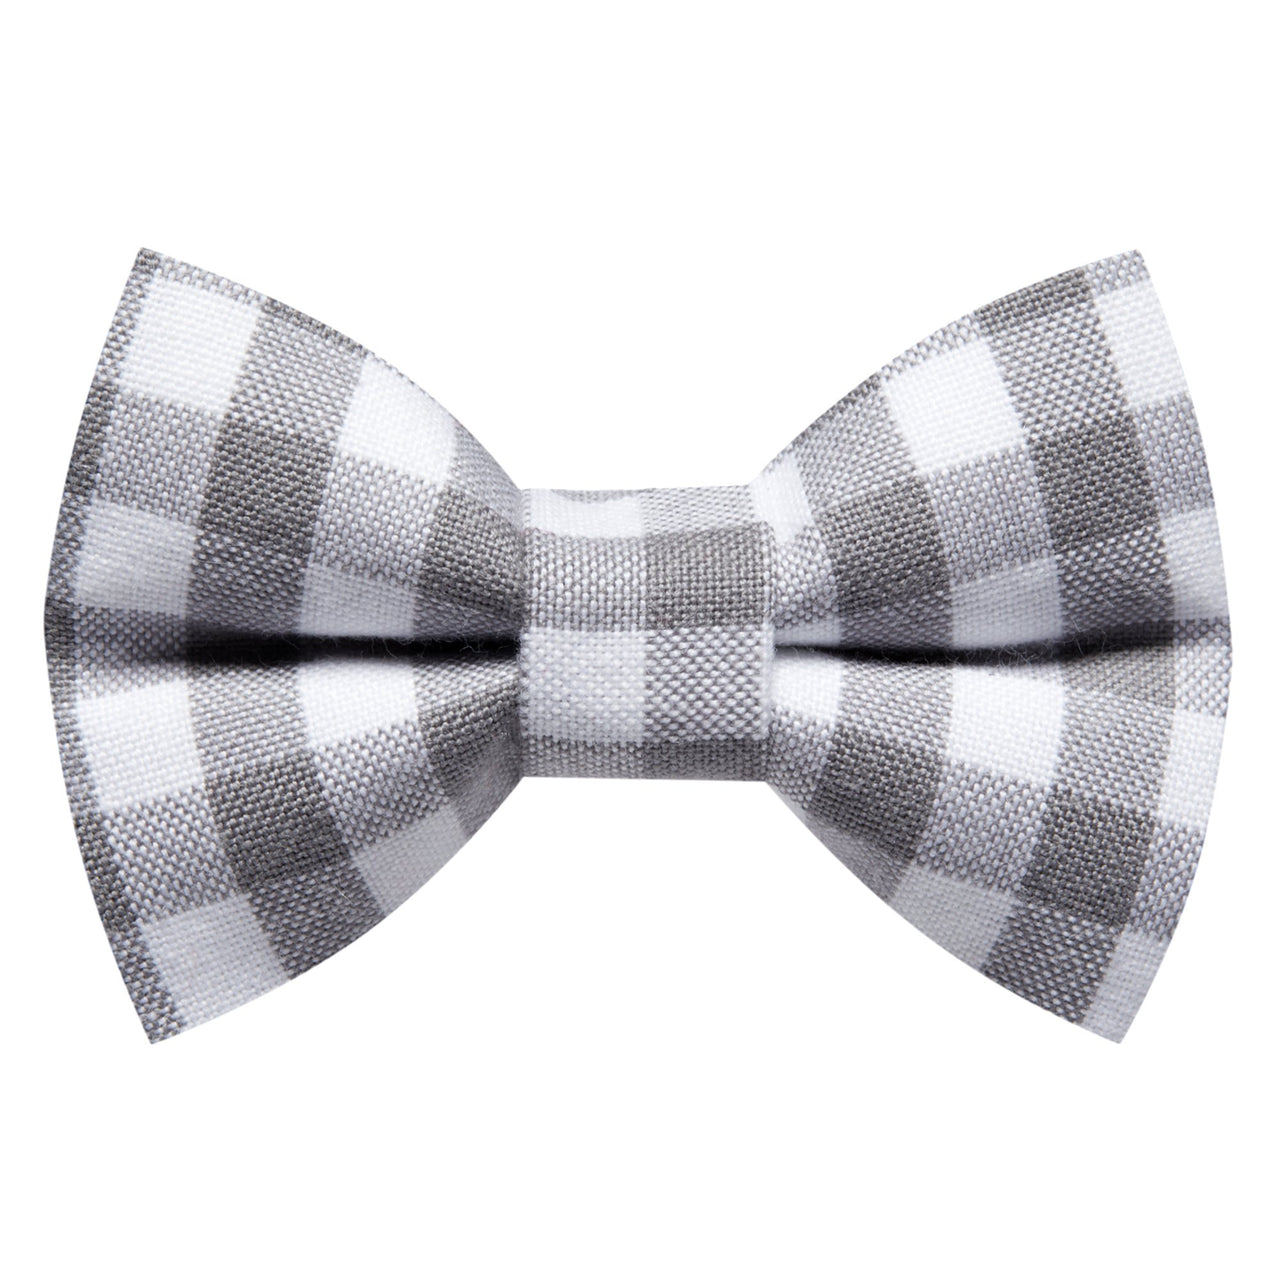 The Checkered Past - Cat / Dog Bow Tie